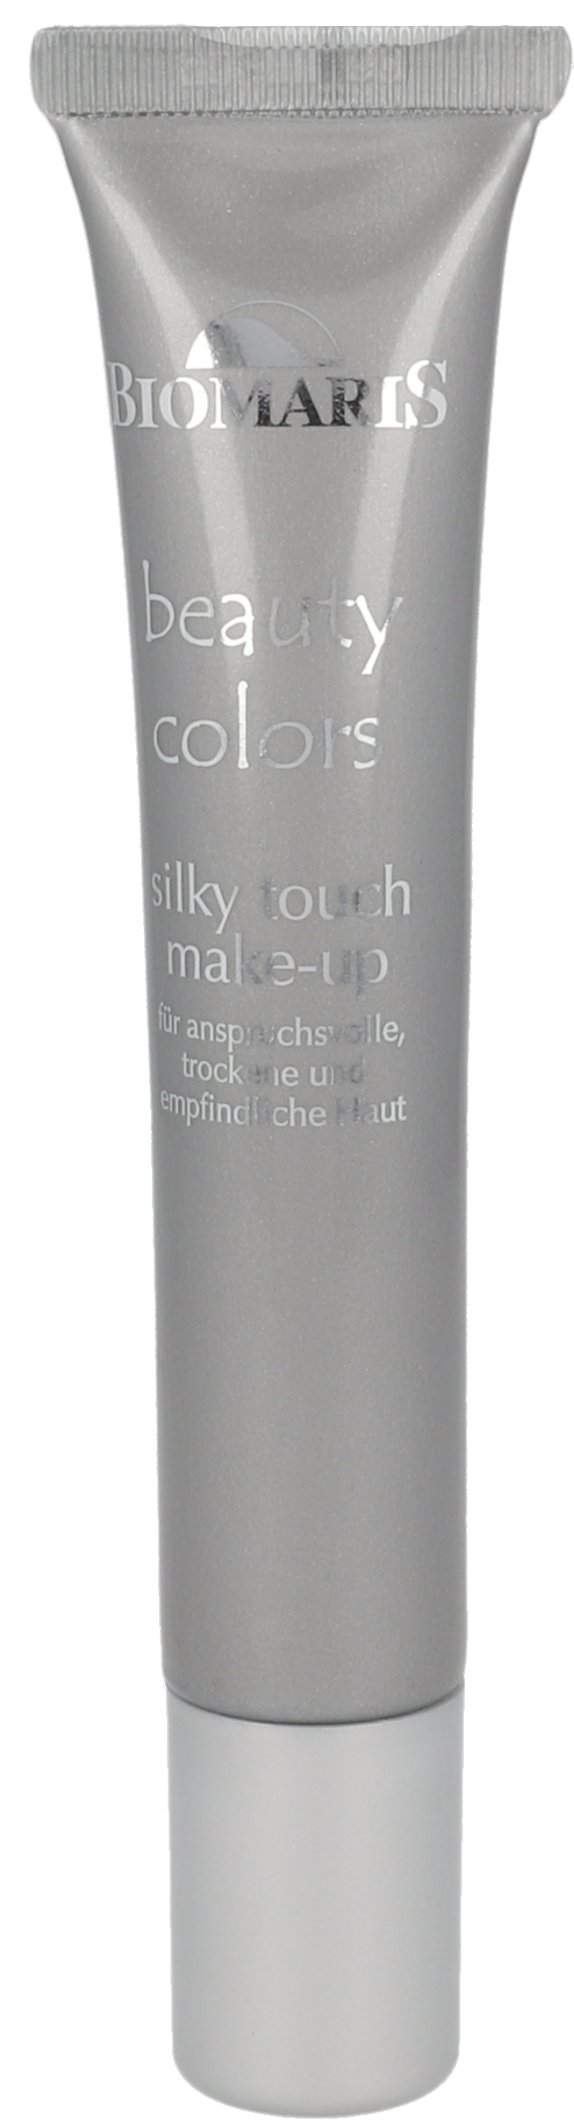 BIOMARIS silky touch Make-up hell